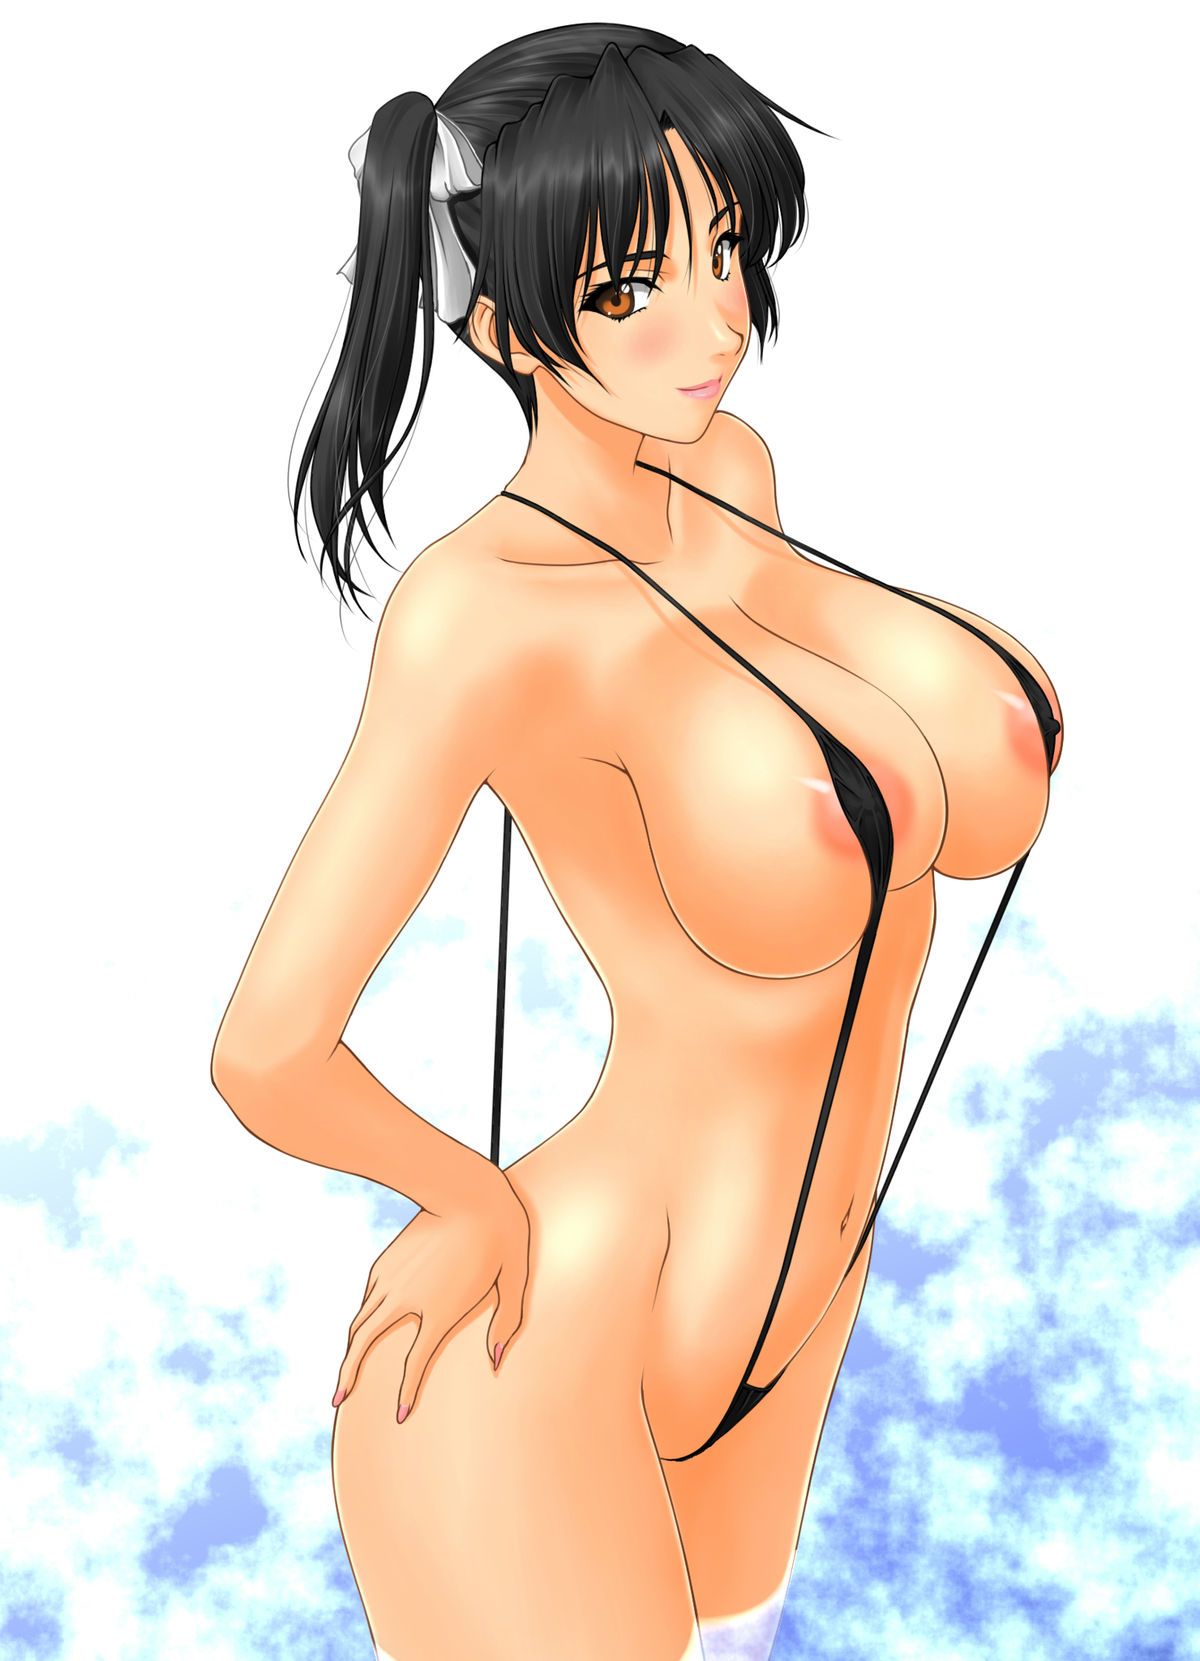 I now want to pull in erotic images of swimsuit from posting. 5